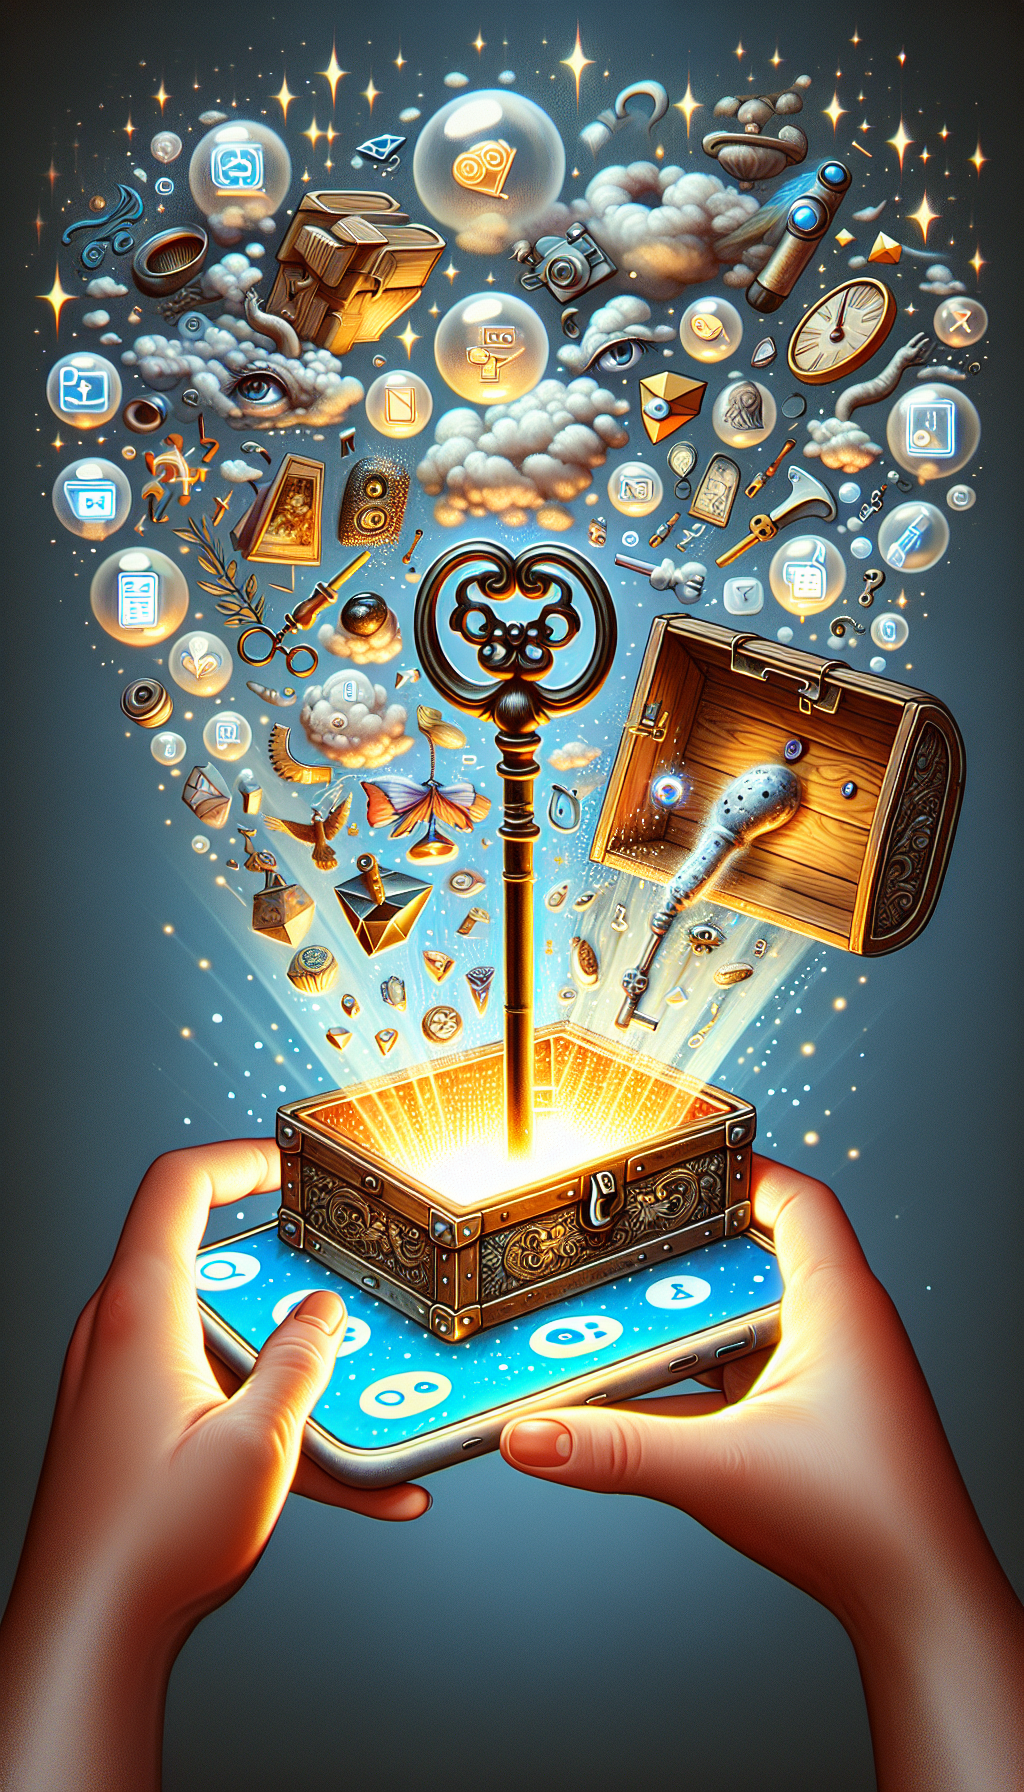 A whimsical, digital illustration shows a vintage key turning inside a glowing smartphone screen, opening a treasure chest overflowing with paintings, sculptures, and jewels. Icons of app interfaces float like bubbles around the chest, each labeled with valuation tools as curious eyes peer from behind artworks—the concept of free art appraisal conveyed with a touch of mystery and discovery.